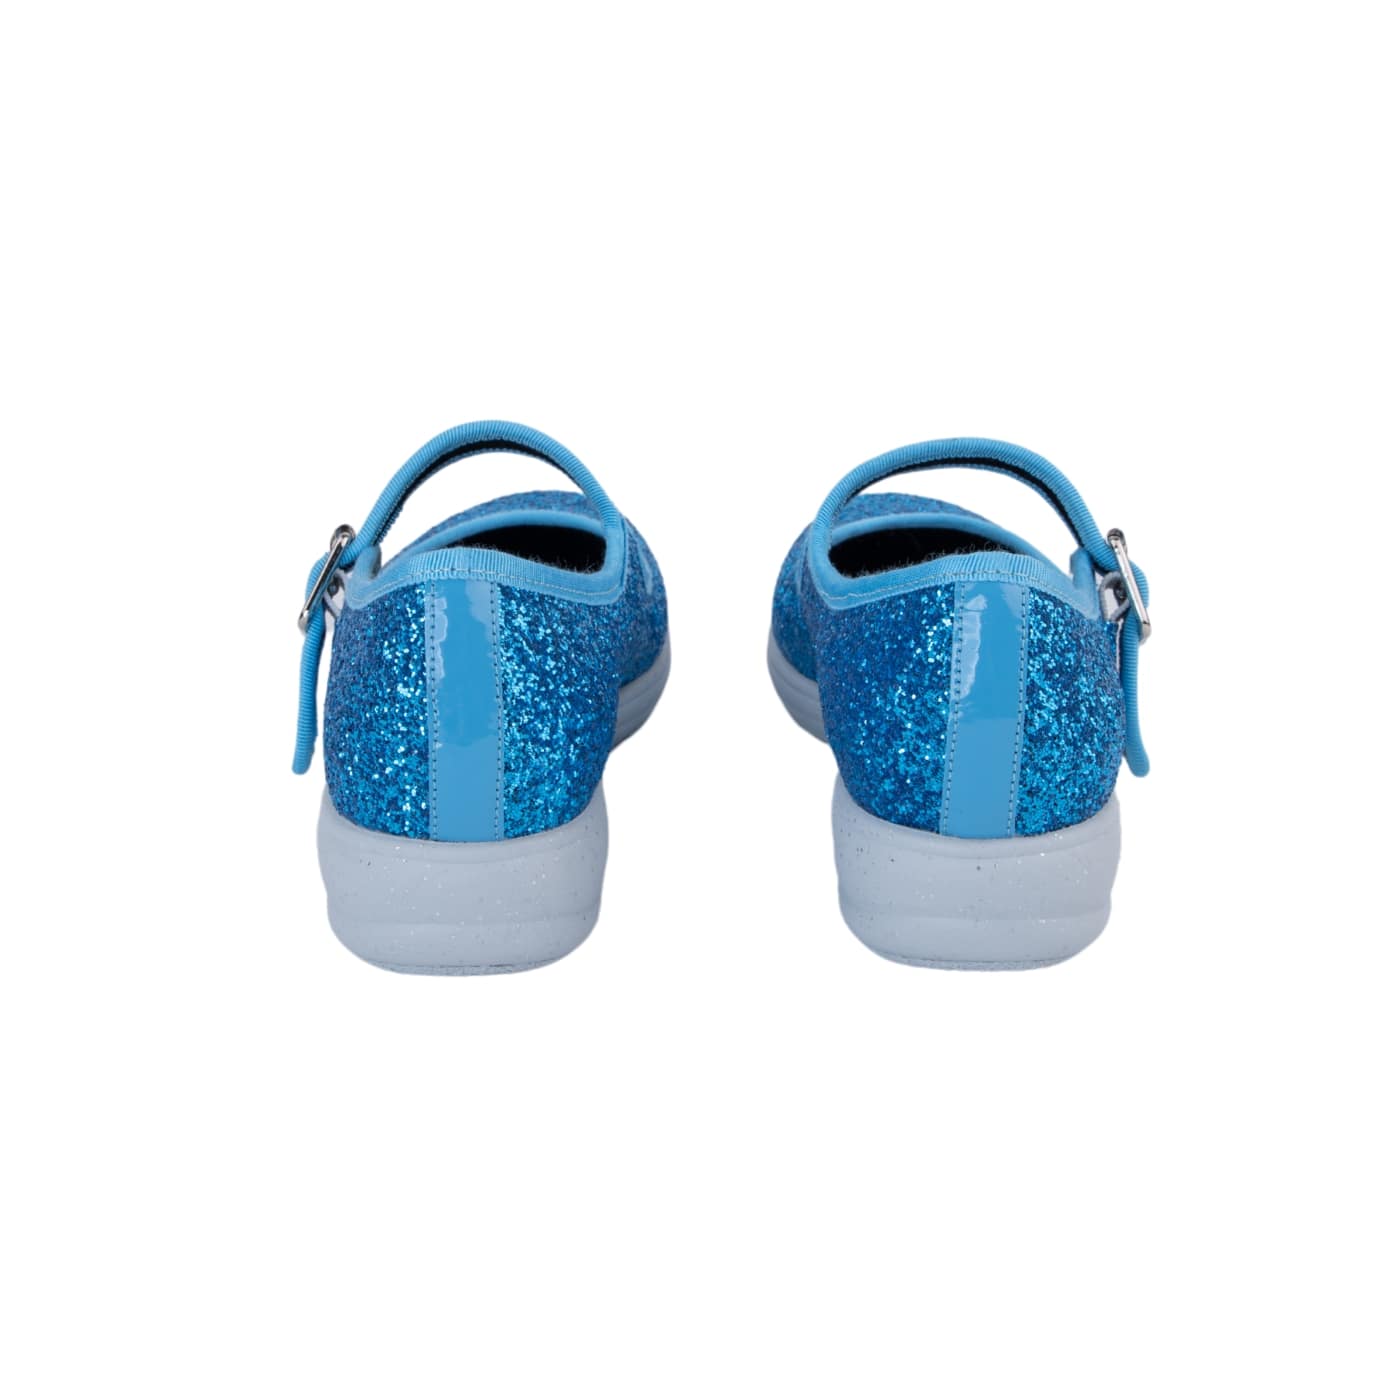 Serenity Mary Janes by RainbowsAndFairies.com.au (Aqua Glitter - Turquoise - Mismatched Shoes - Cute & Comfy - Buckle Up Shoes - Holographic - Glitter) - SKU: FW_MARYJ_GLITR_SER - Pic-05